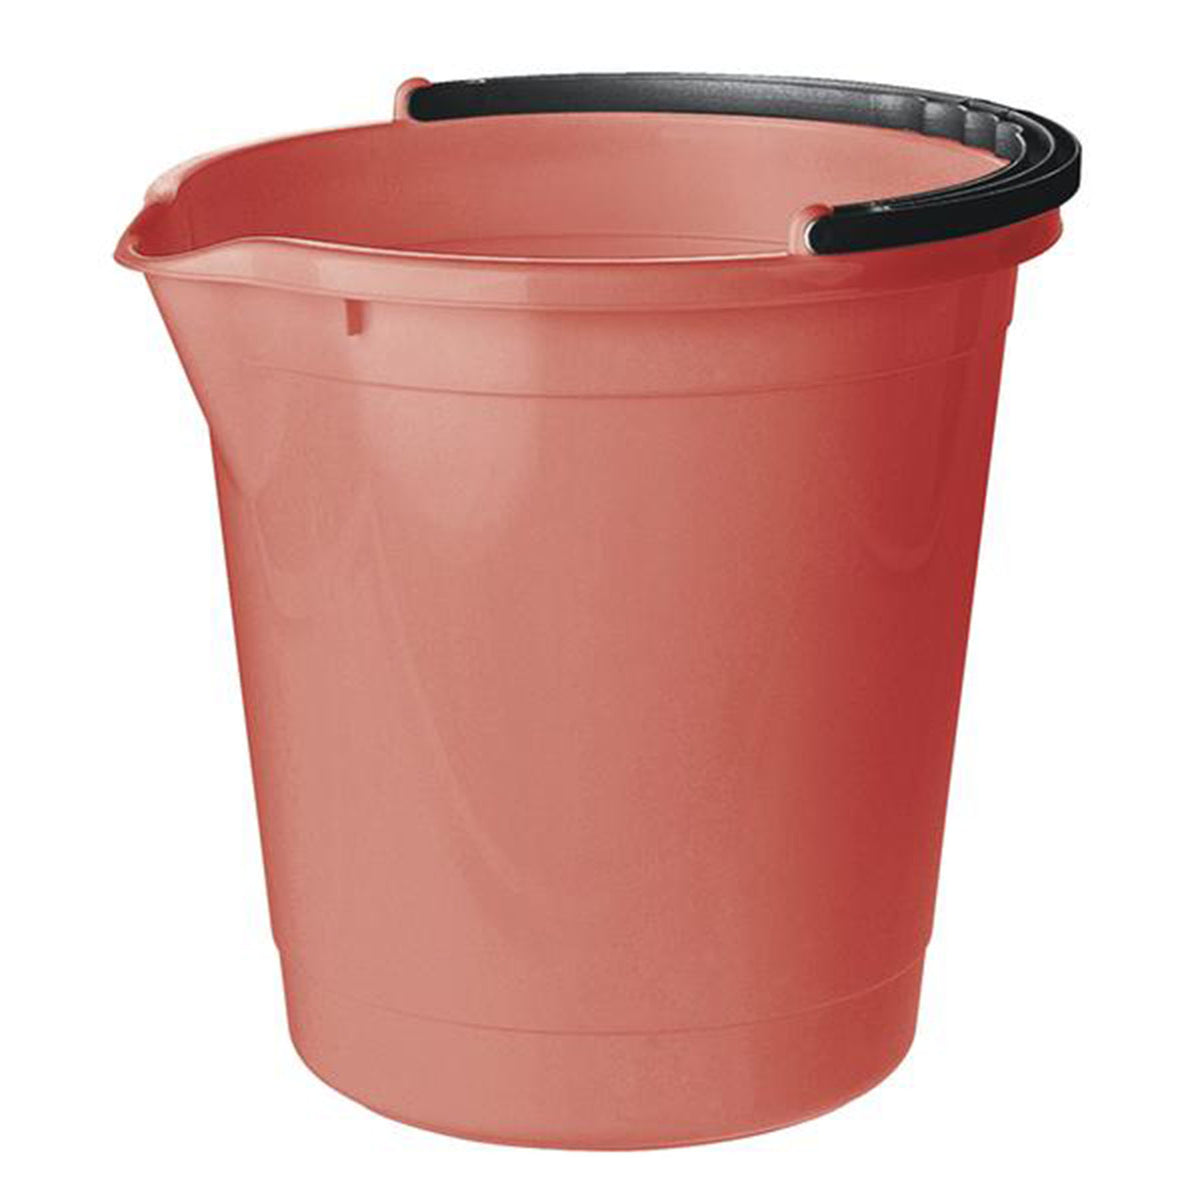 Bucket with handle - Red Size: 25 x H26.5 cm